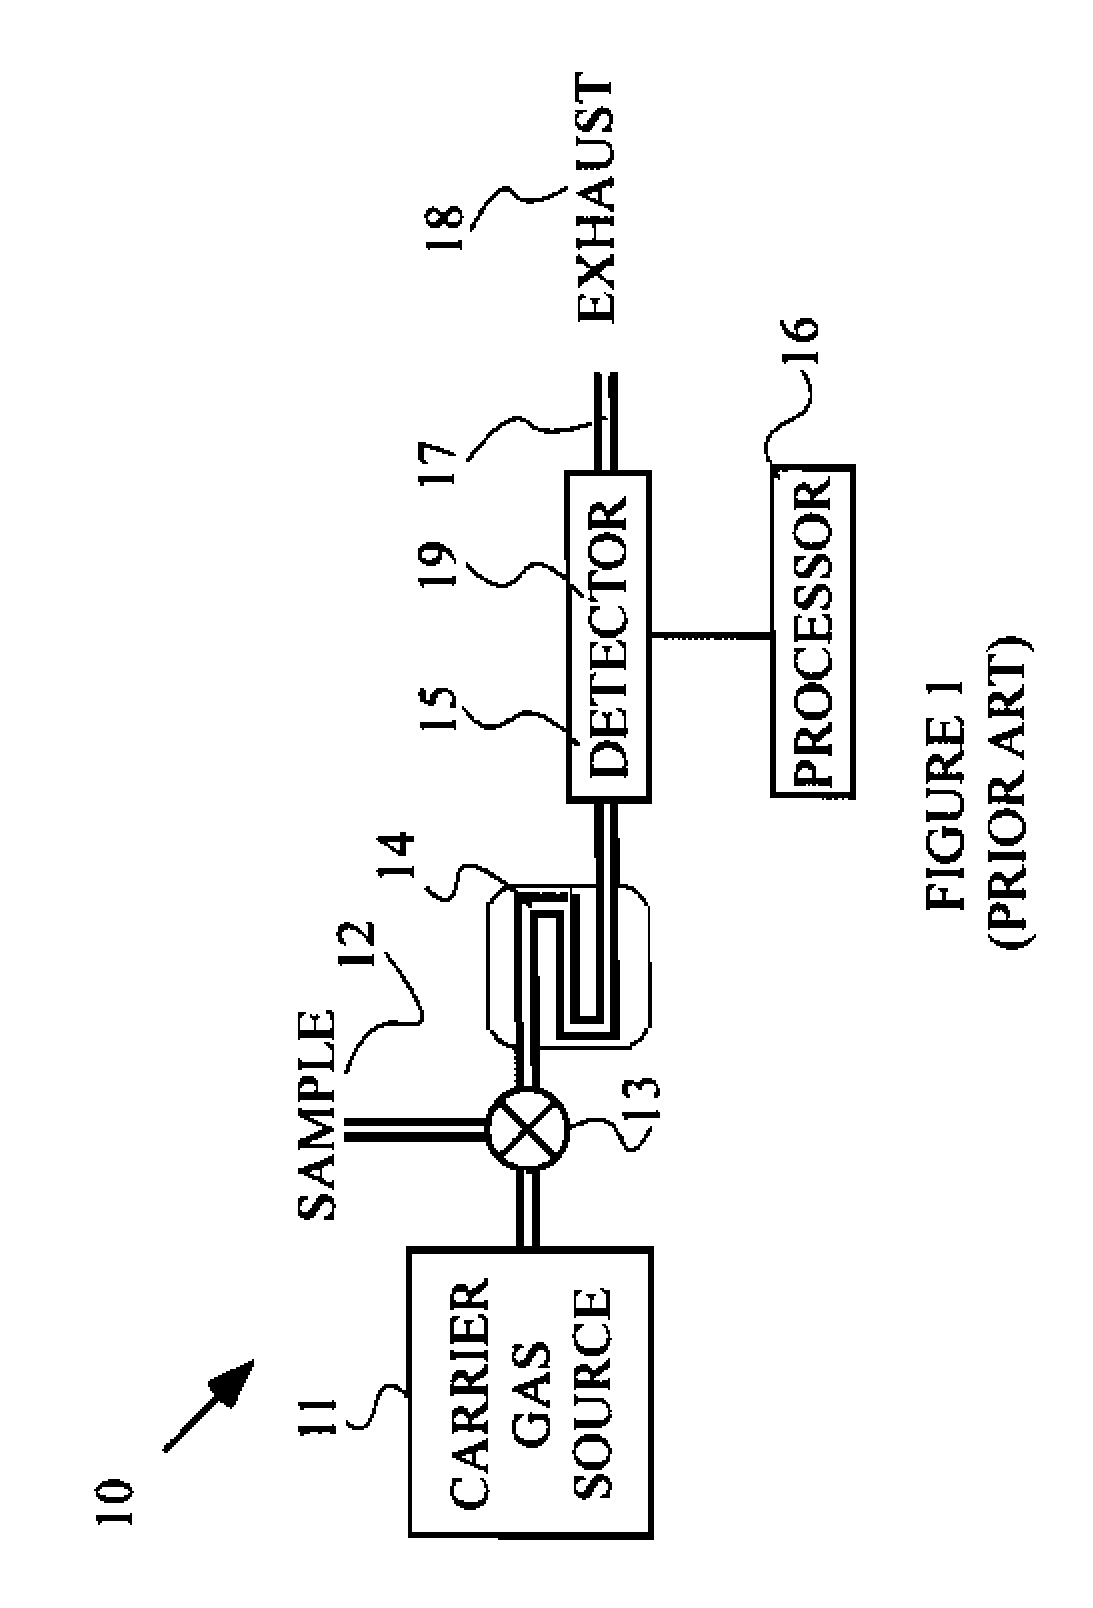 Choked Flow Isolator for Noise Reduction in Analytical Systems